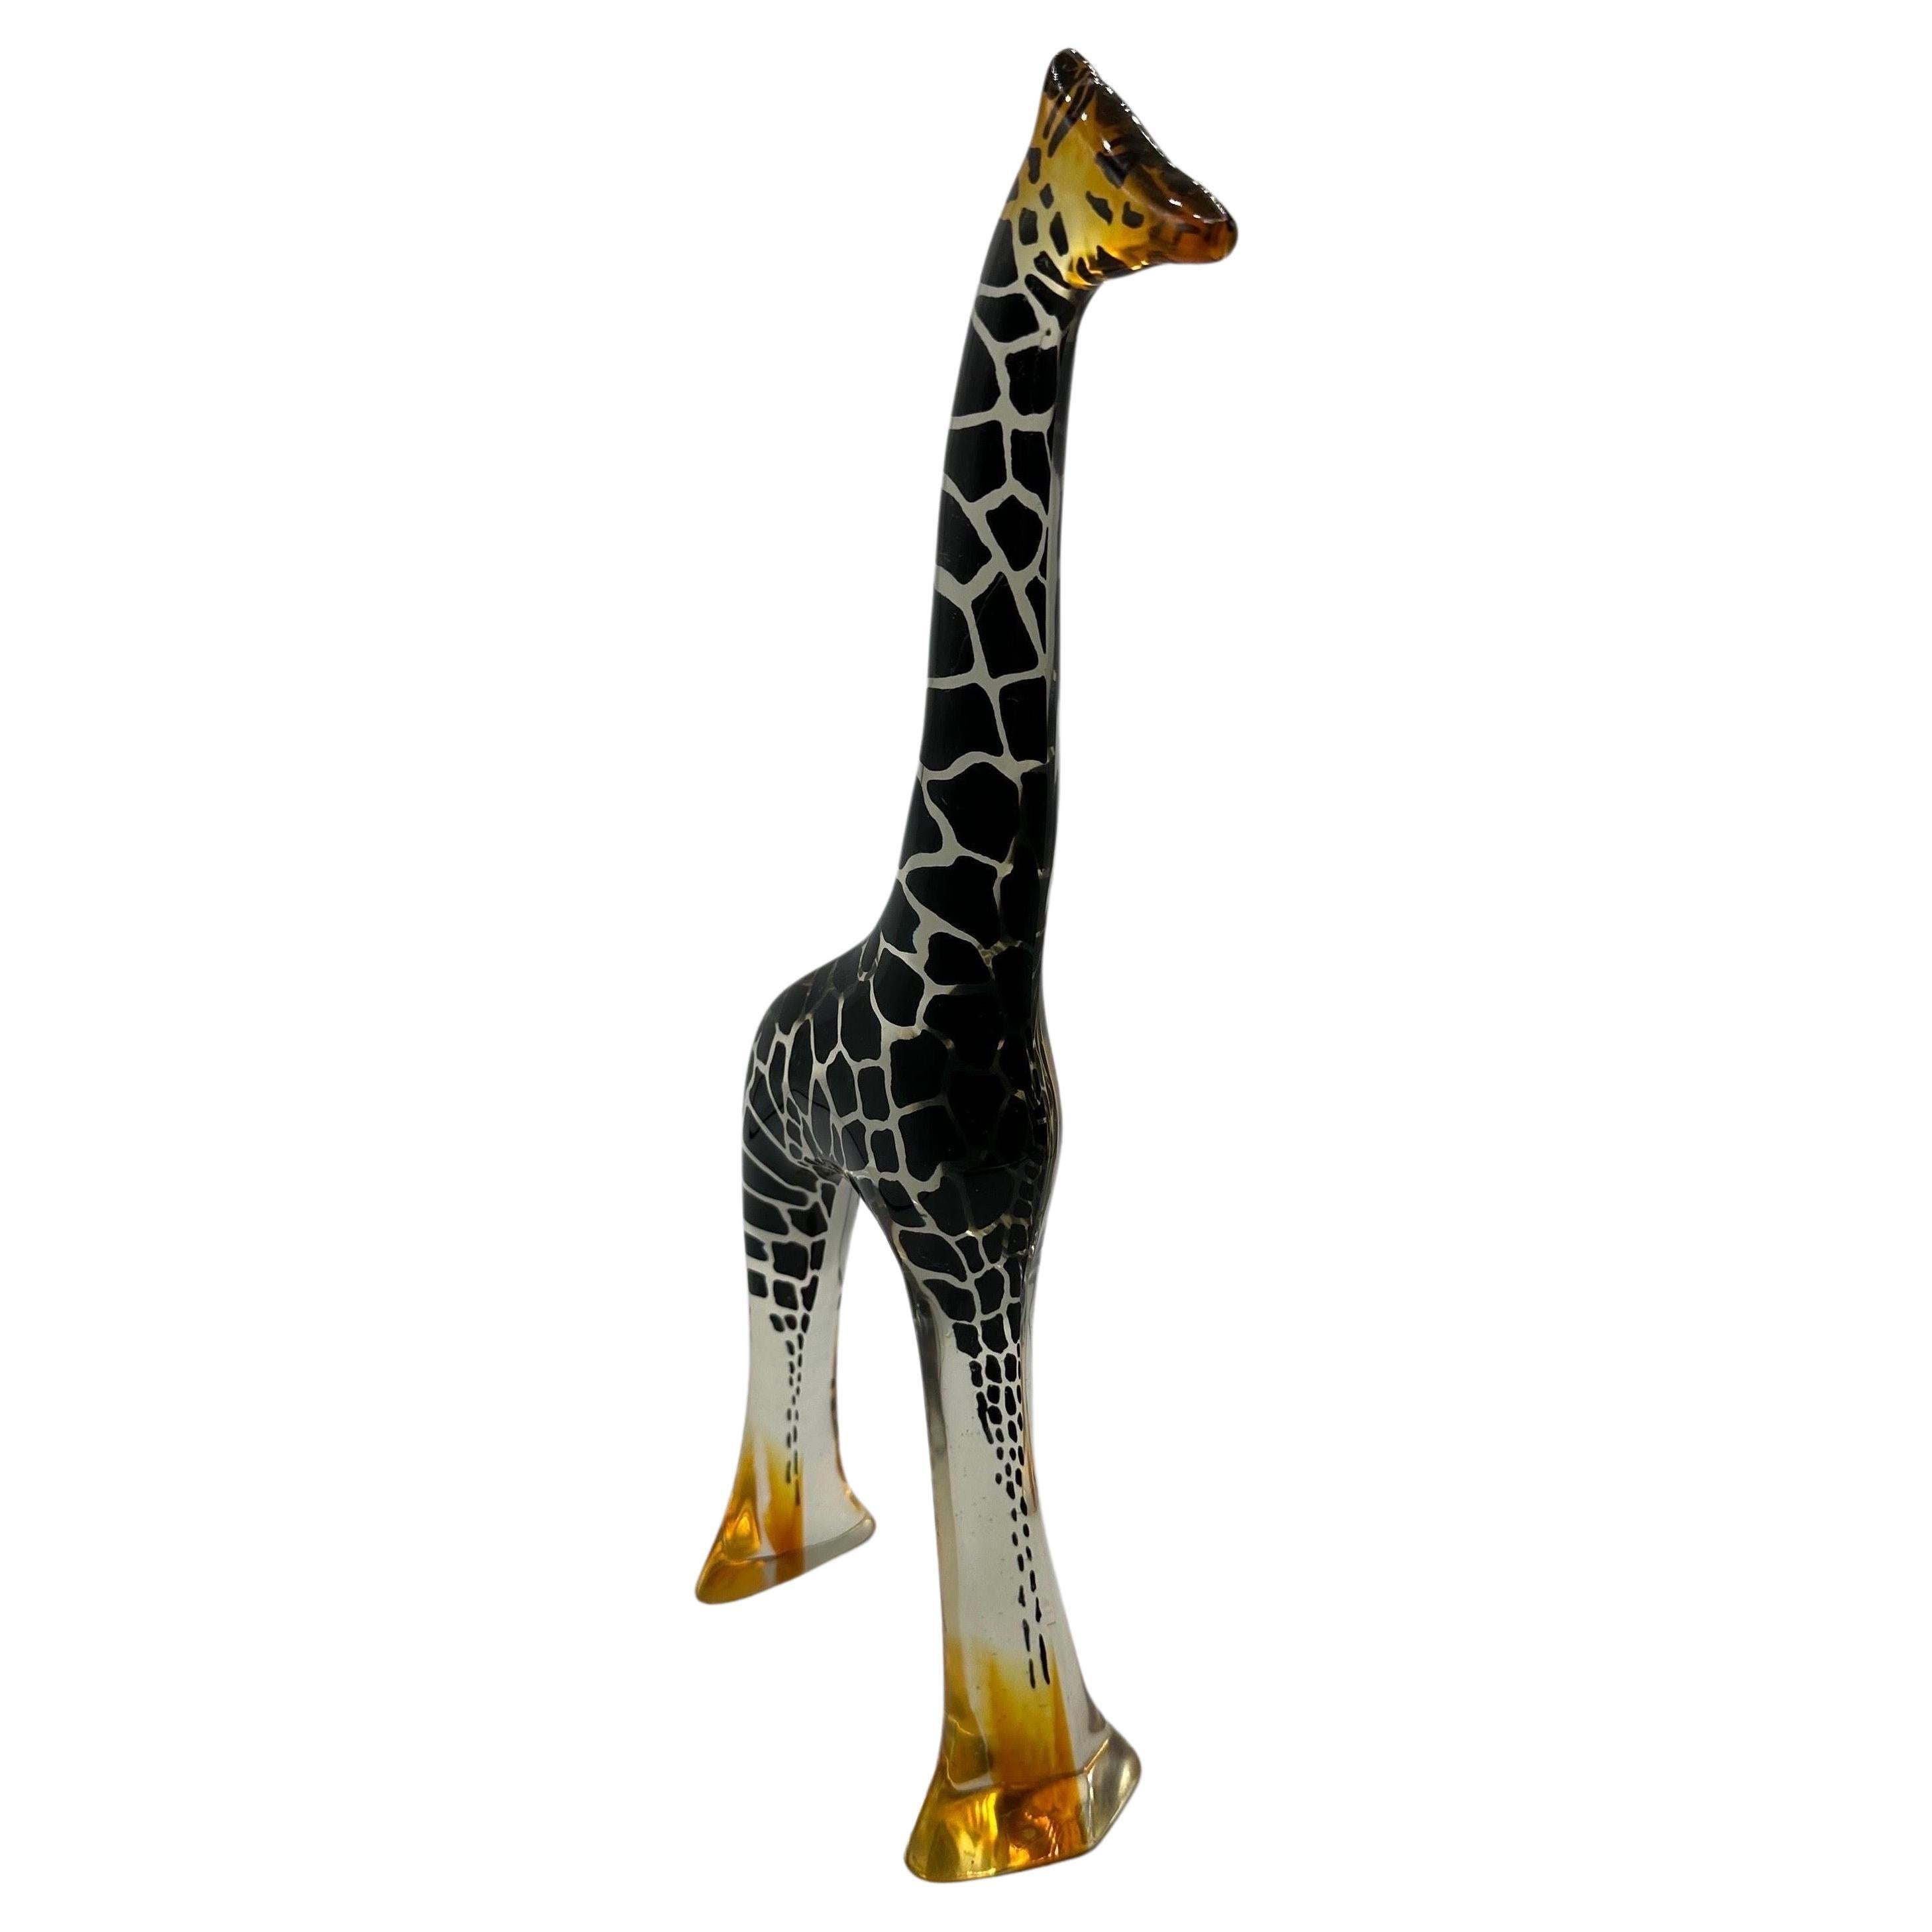 Gorgeous large size resin giraffe sculpture by Brazilian artist Araham Palatnik.  Black outline detail encased in clear resin with yellow ombre at the base. 